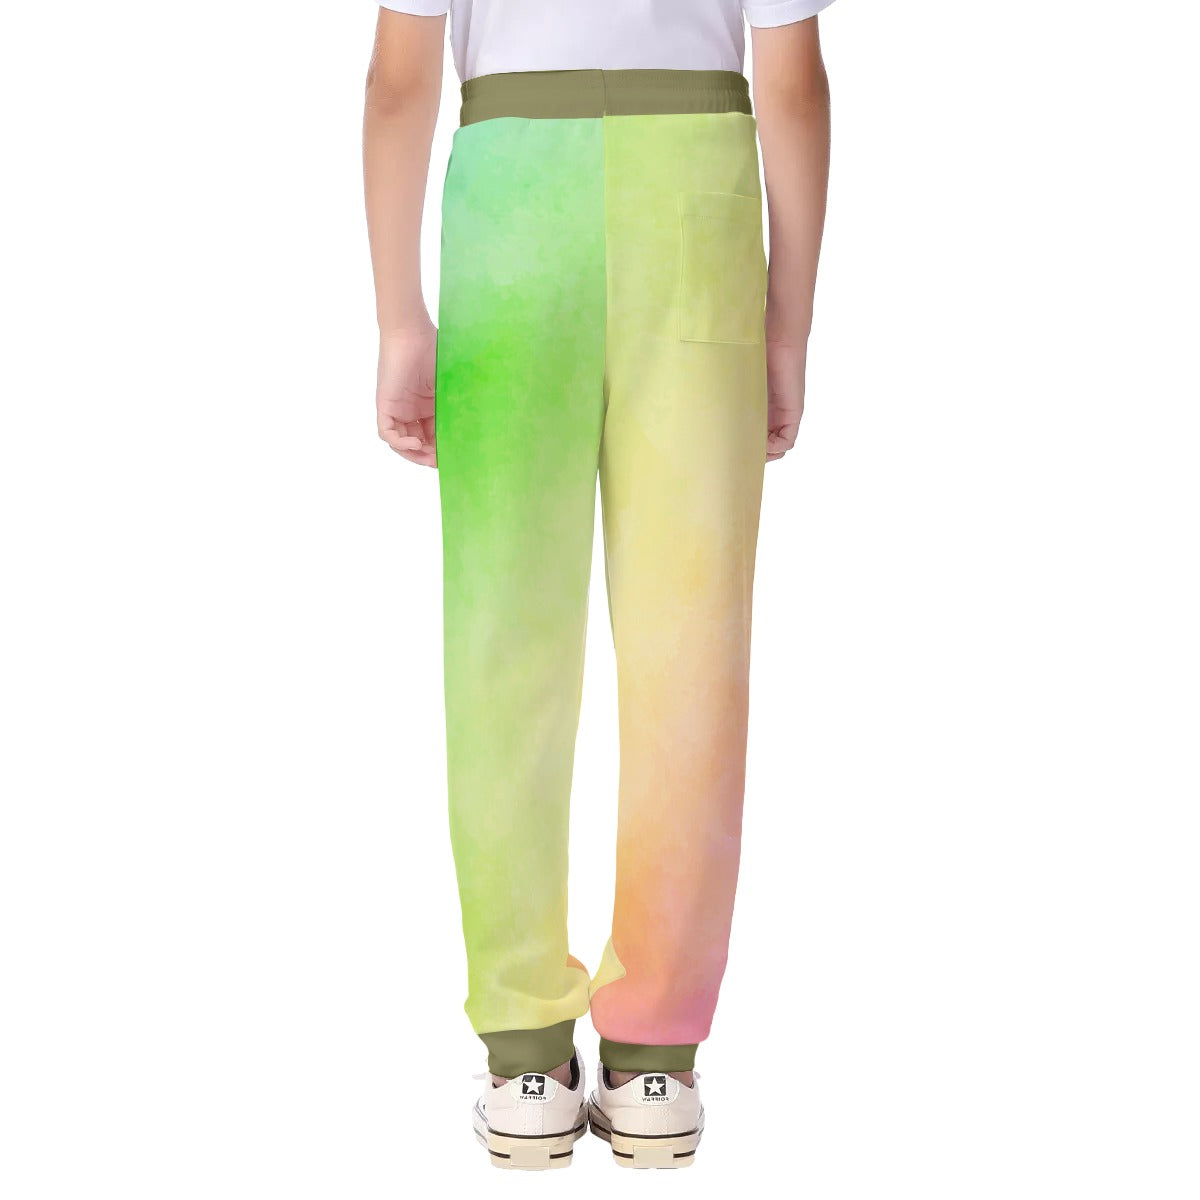 Kids yoga pants - colorful yoga trousers - Personal Hour for Yoga and Meditations 